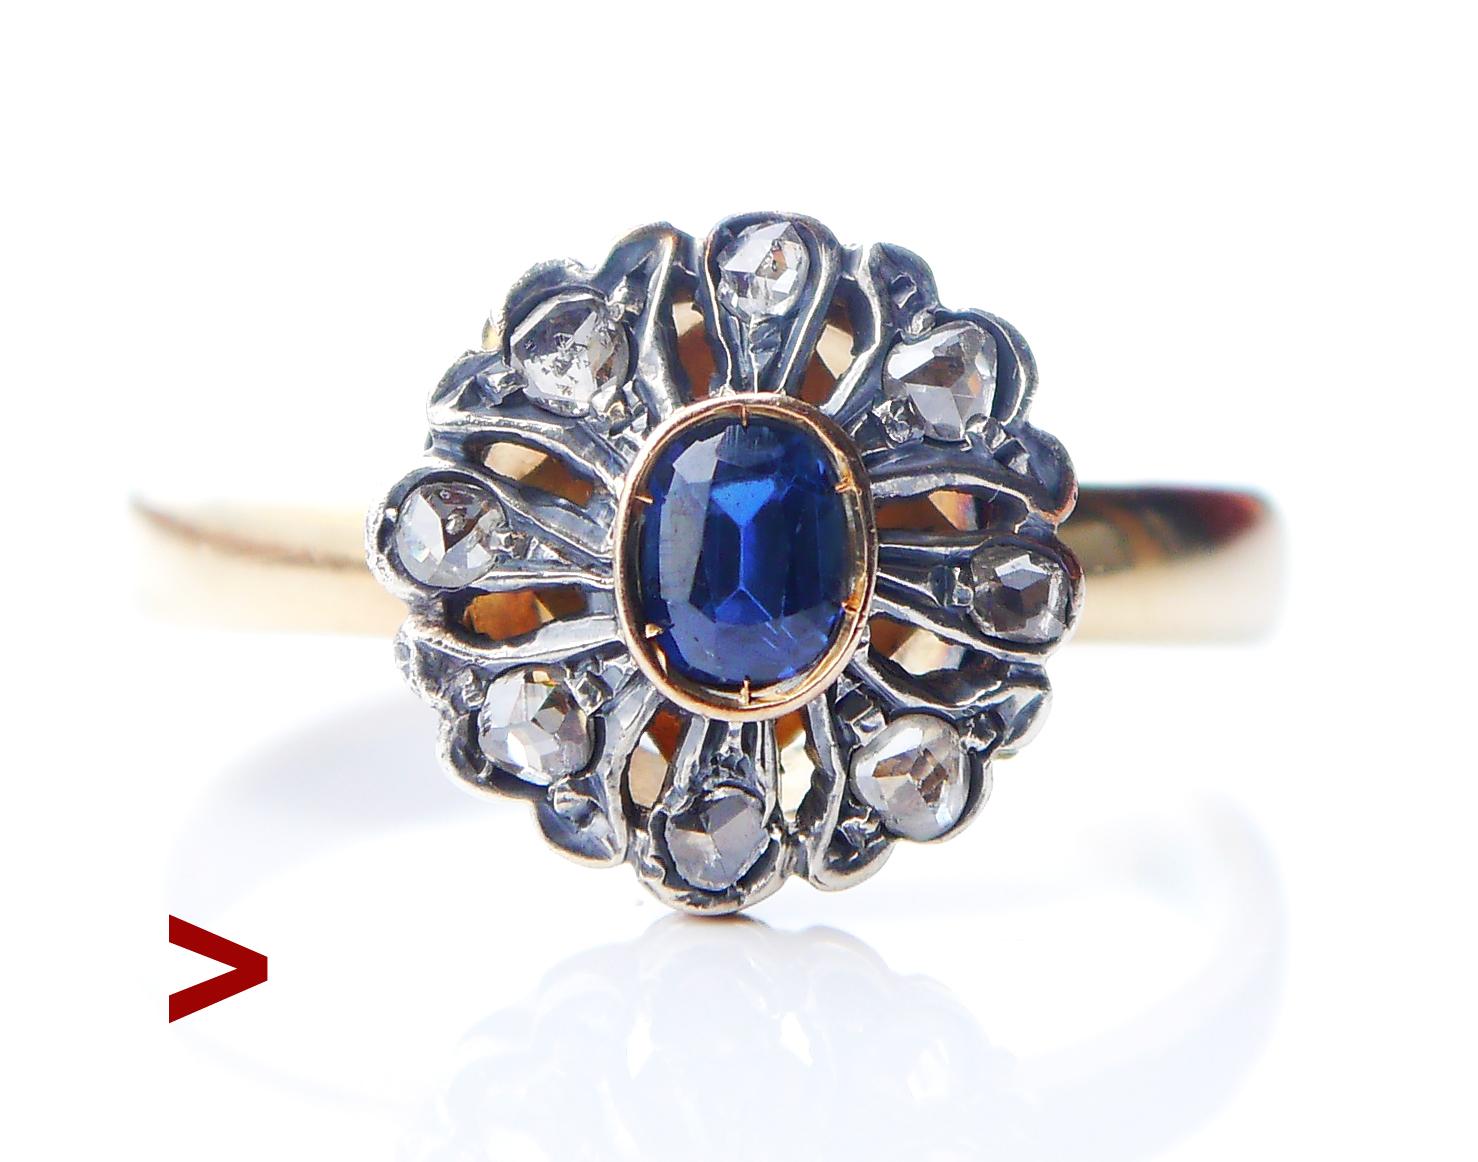 Beautiful Antique Halo Ring. Band in solid 18K Greenish Yellow Gold with Silver openwork crown featuring natural Blue Sapphire and 8 Diamonds. No hallmarks, European made ca 1900 s - 1930s.

Floret / crown measures Ø 13 mm x 7 mm deep ..

Sapphire